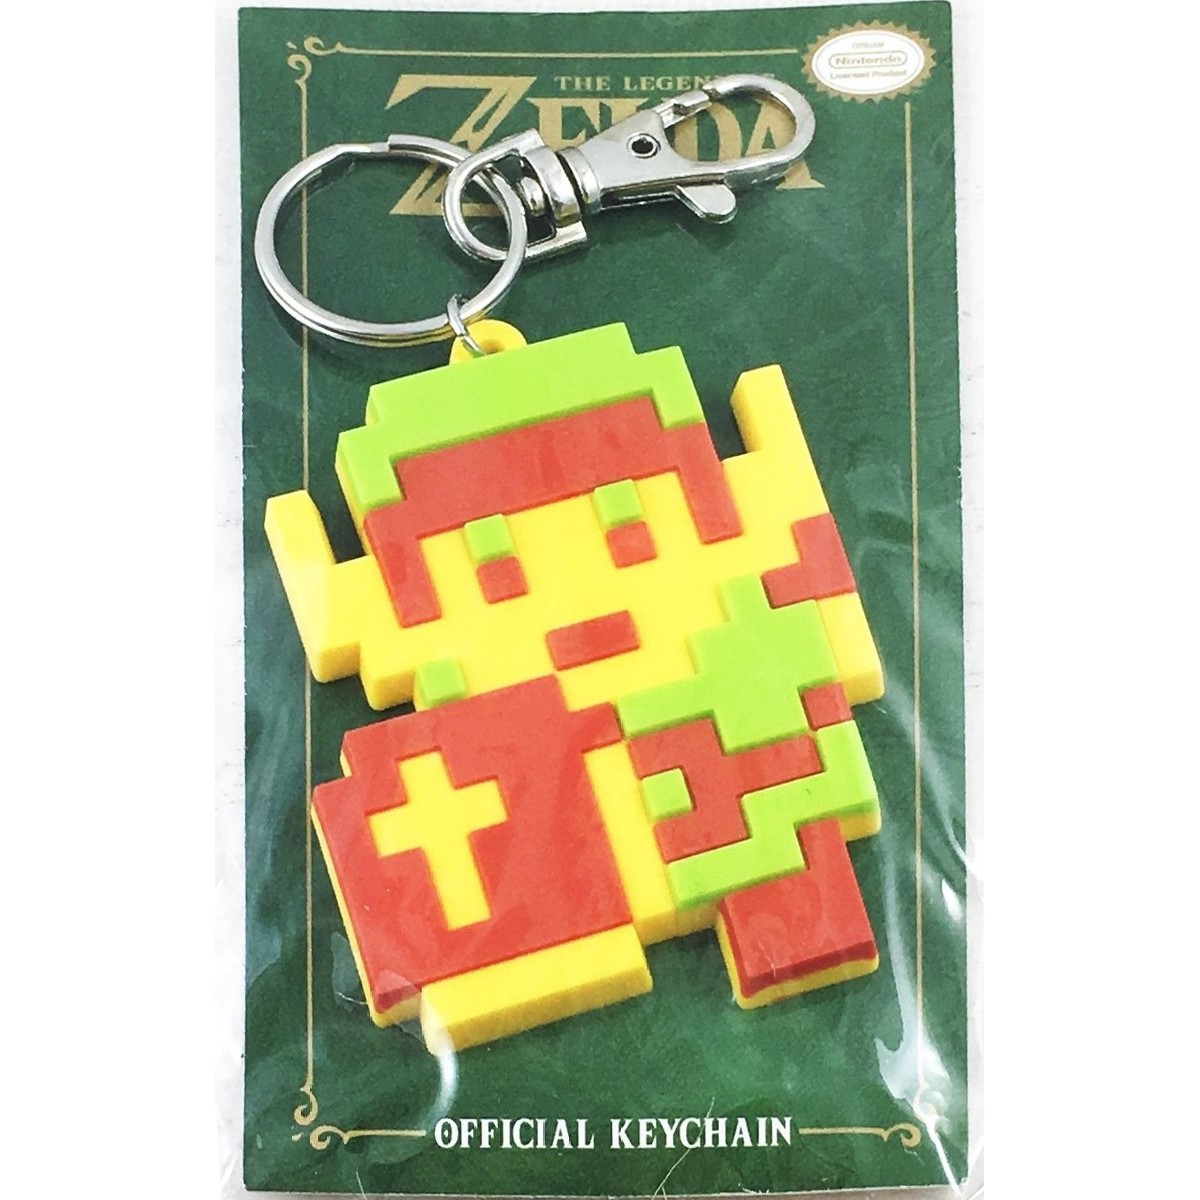 Link Rubber Keychain by Pyramid America, USA 2018.